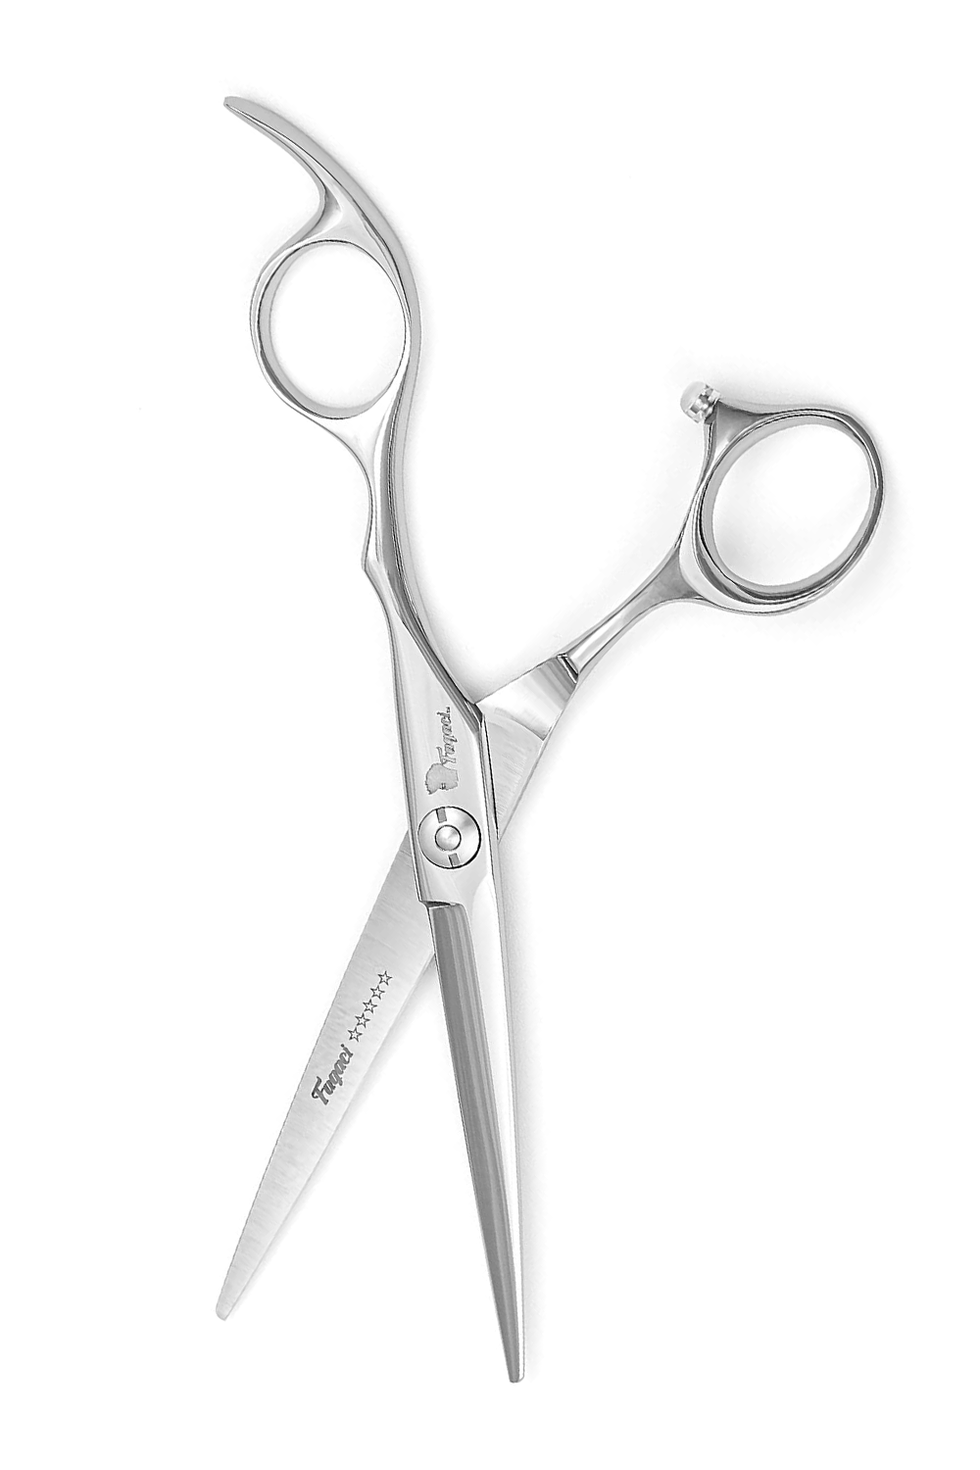 How To Use Hair Cutting Scissors